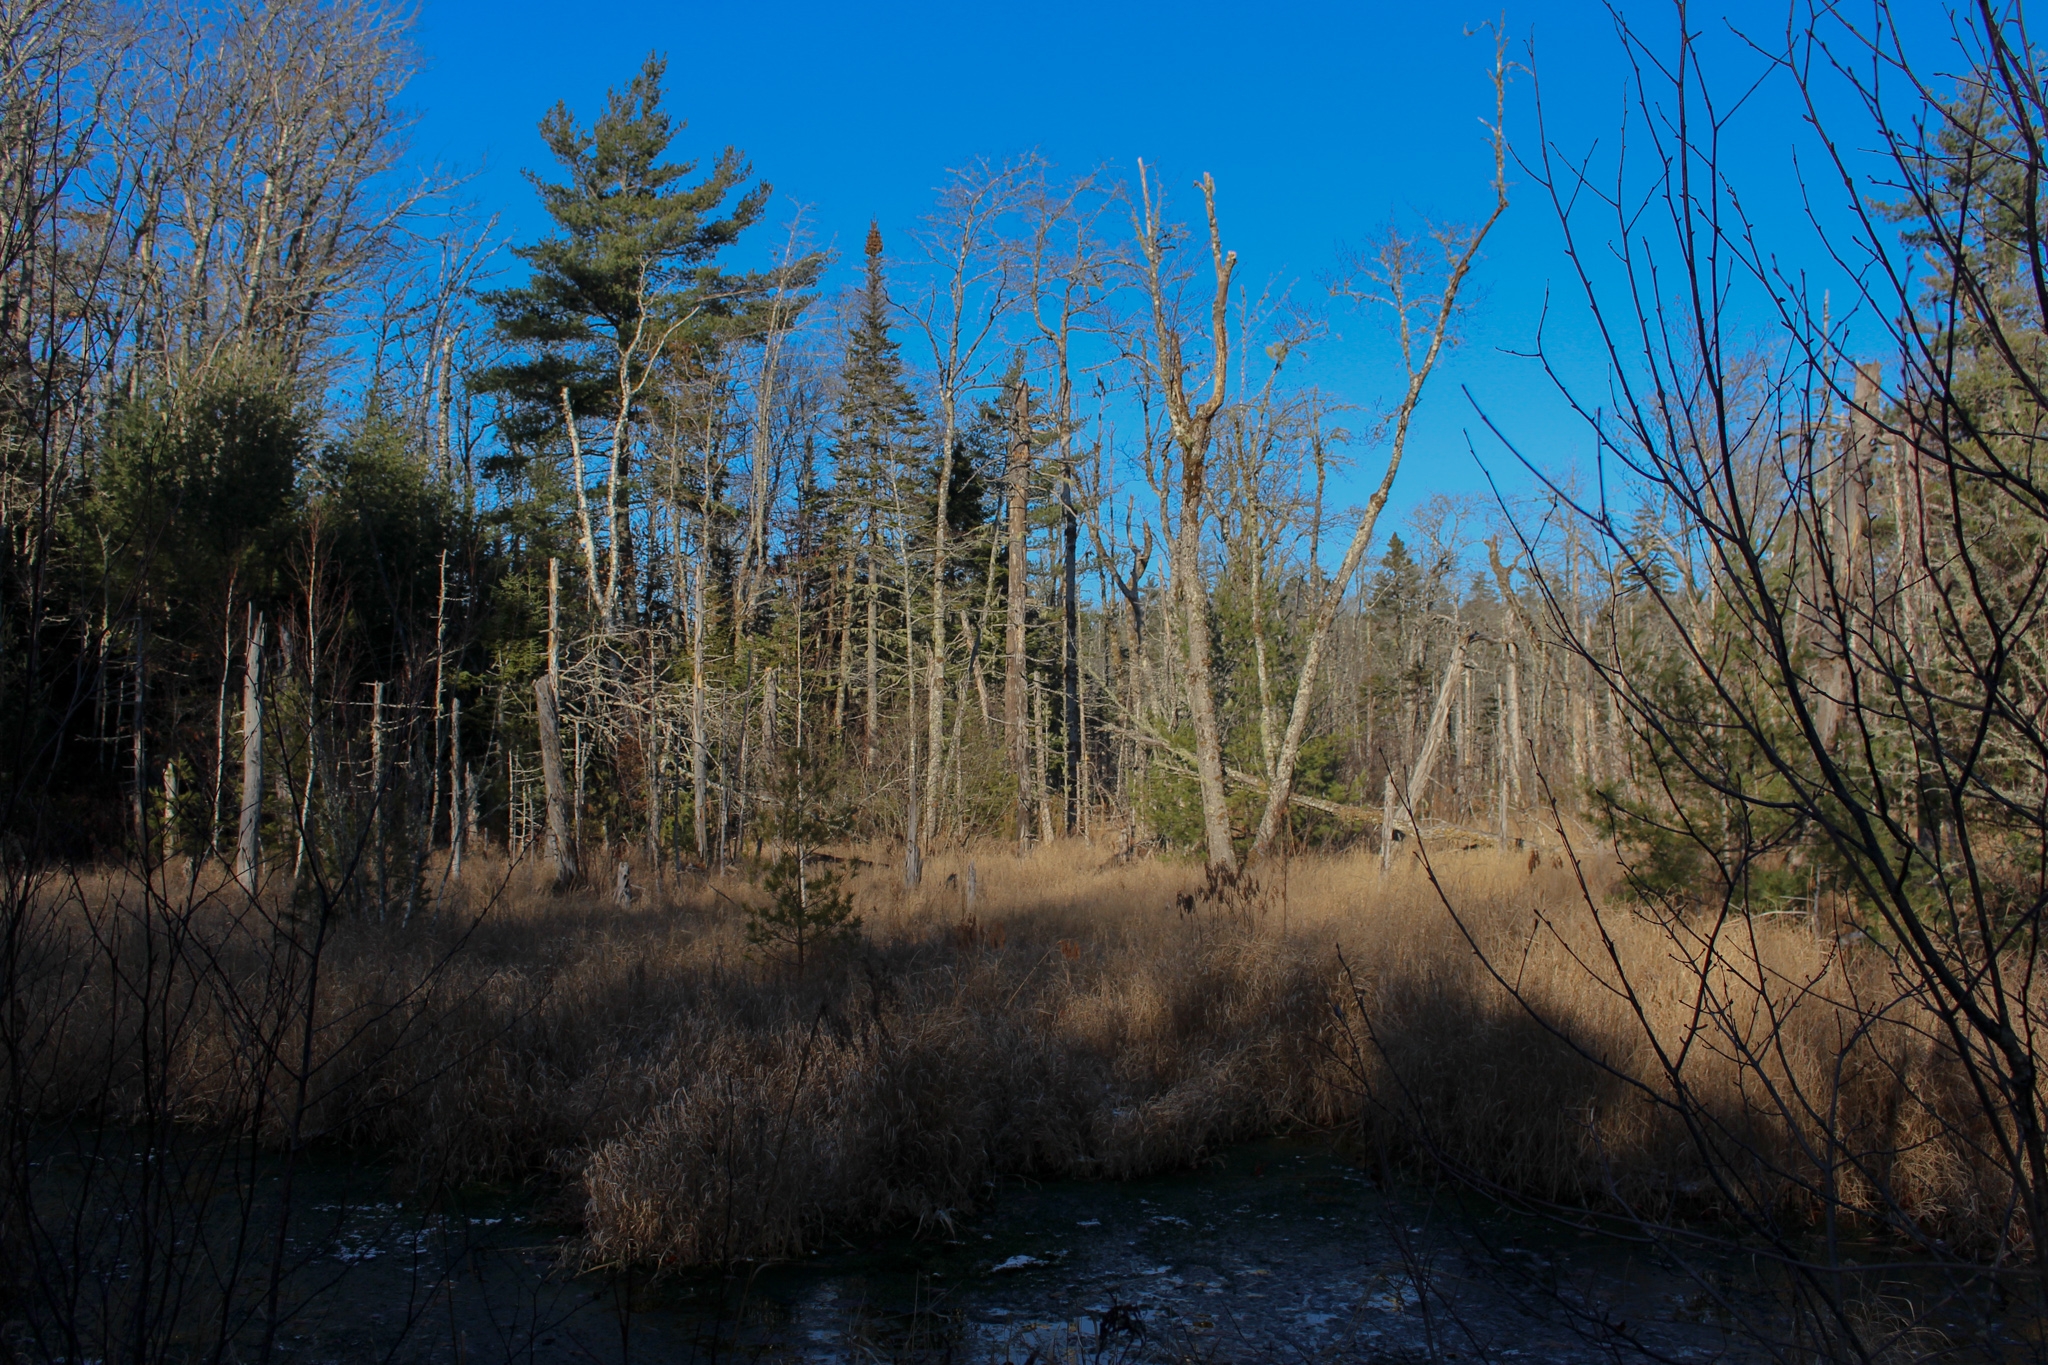 Blue sky above a stand of barren trees in winter. Below is grassy wetland.